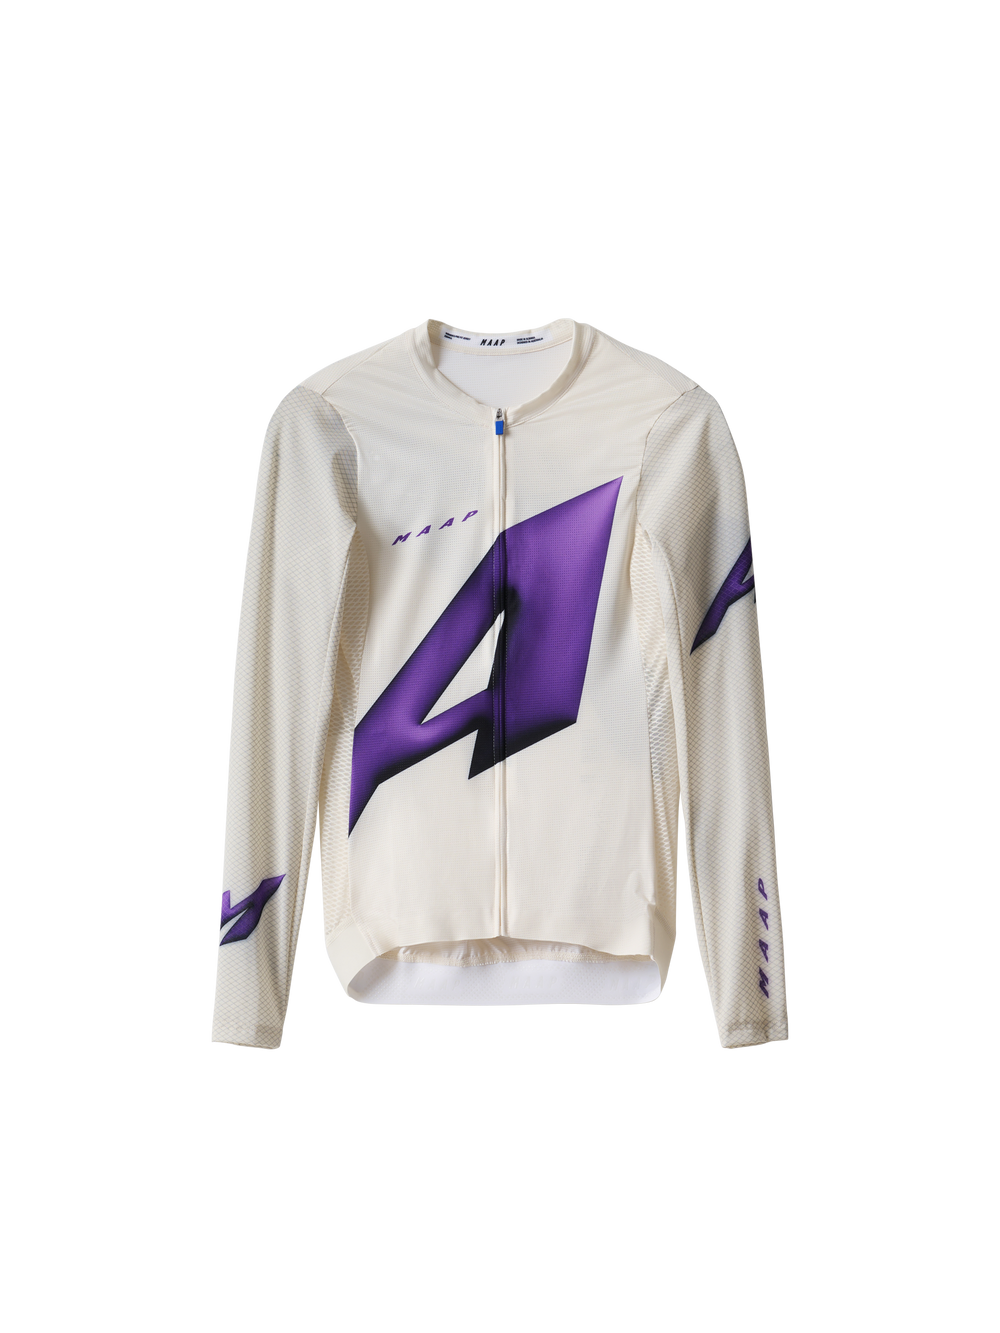 Product Image for Women's Orbit Pro Air LS Jersey